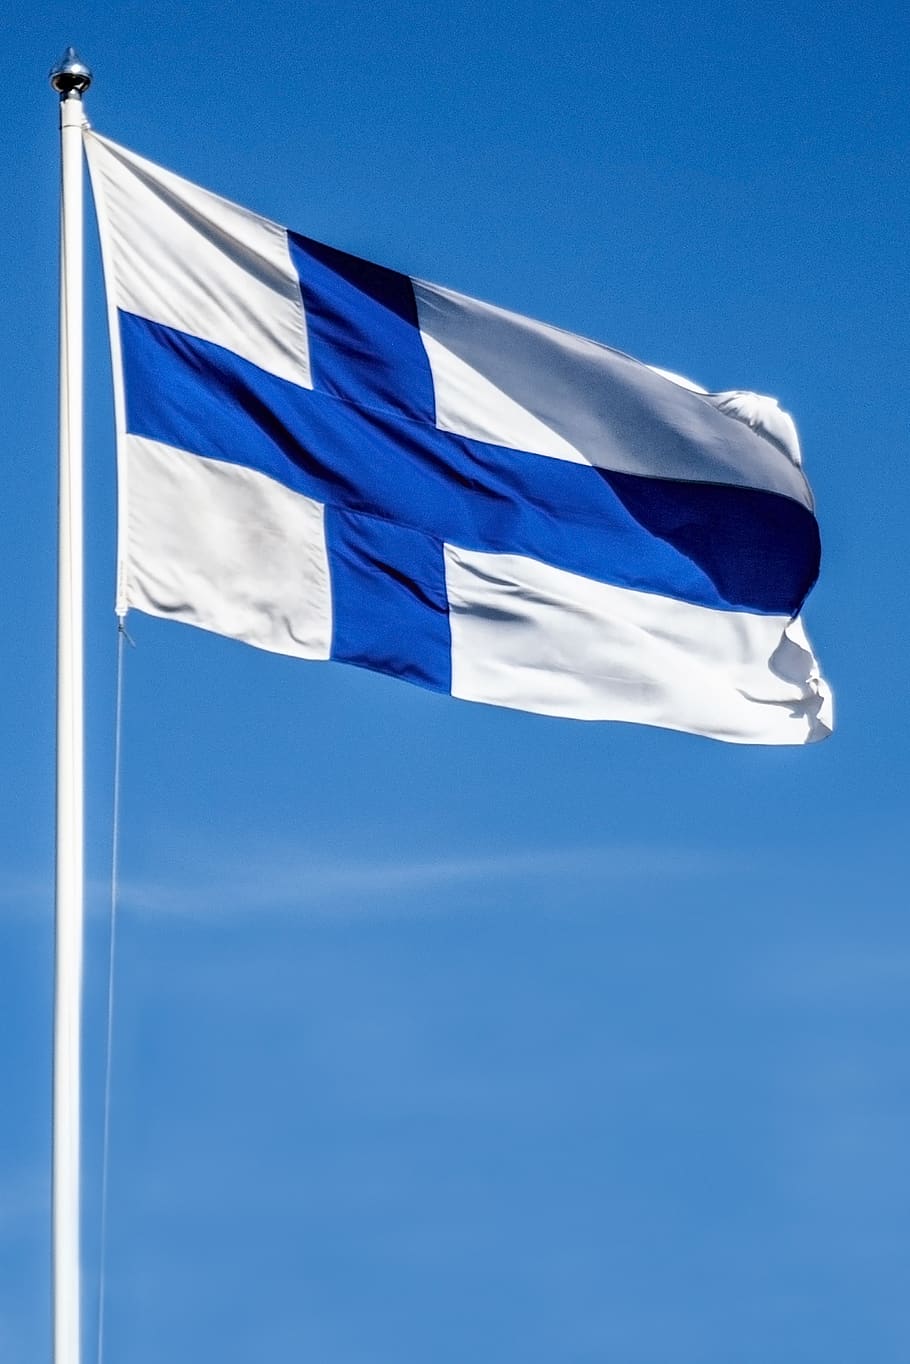 flag of finland, flag, blue cross flag, tickets, blue and white, blue, independence day, patriotism, sky, wind